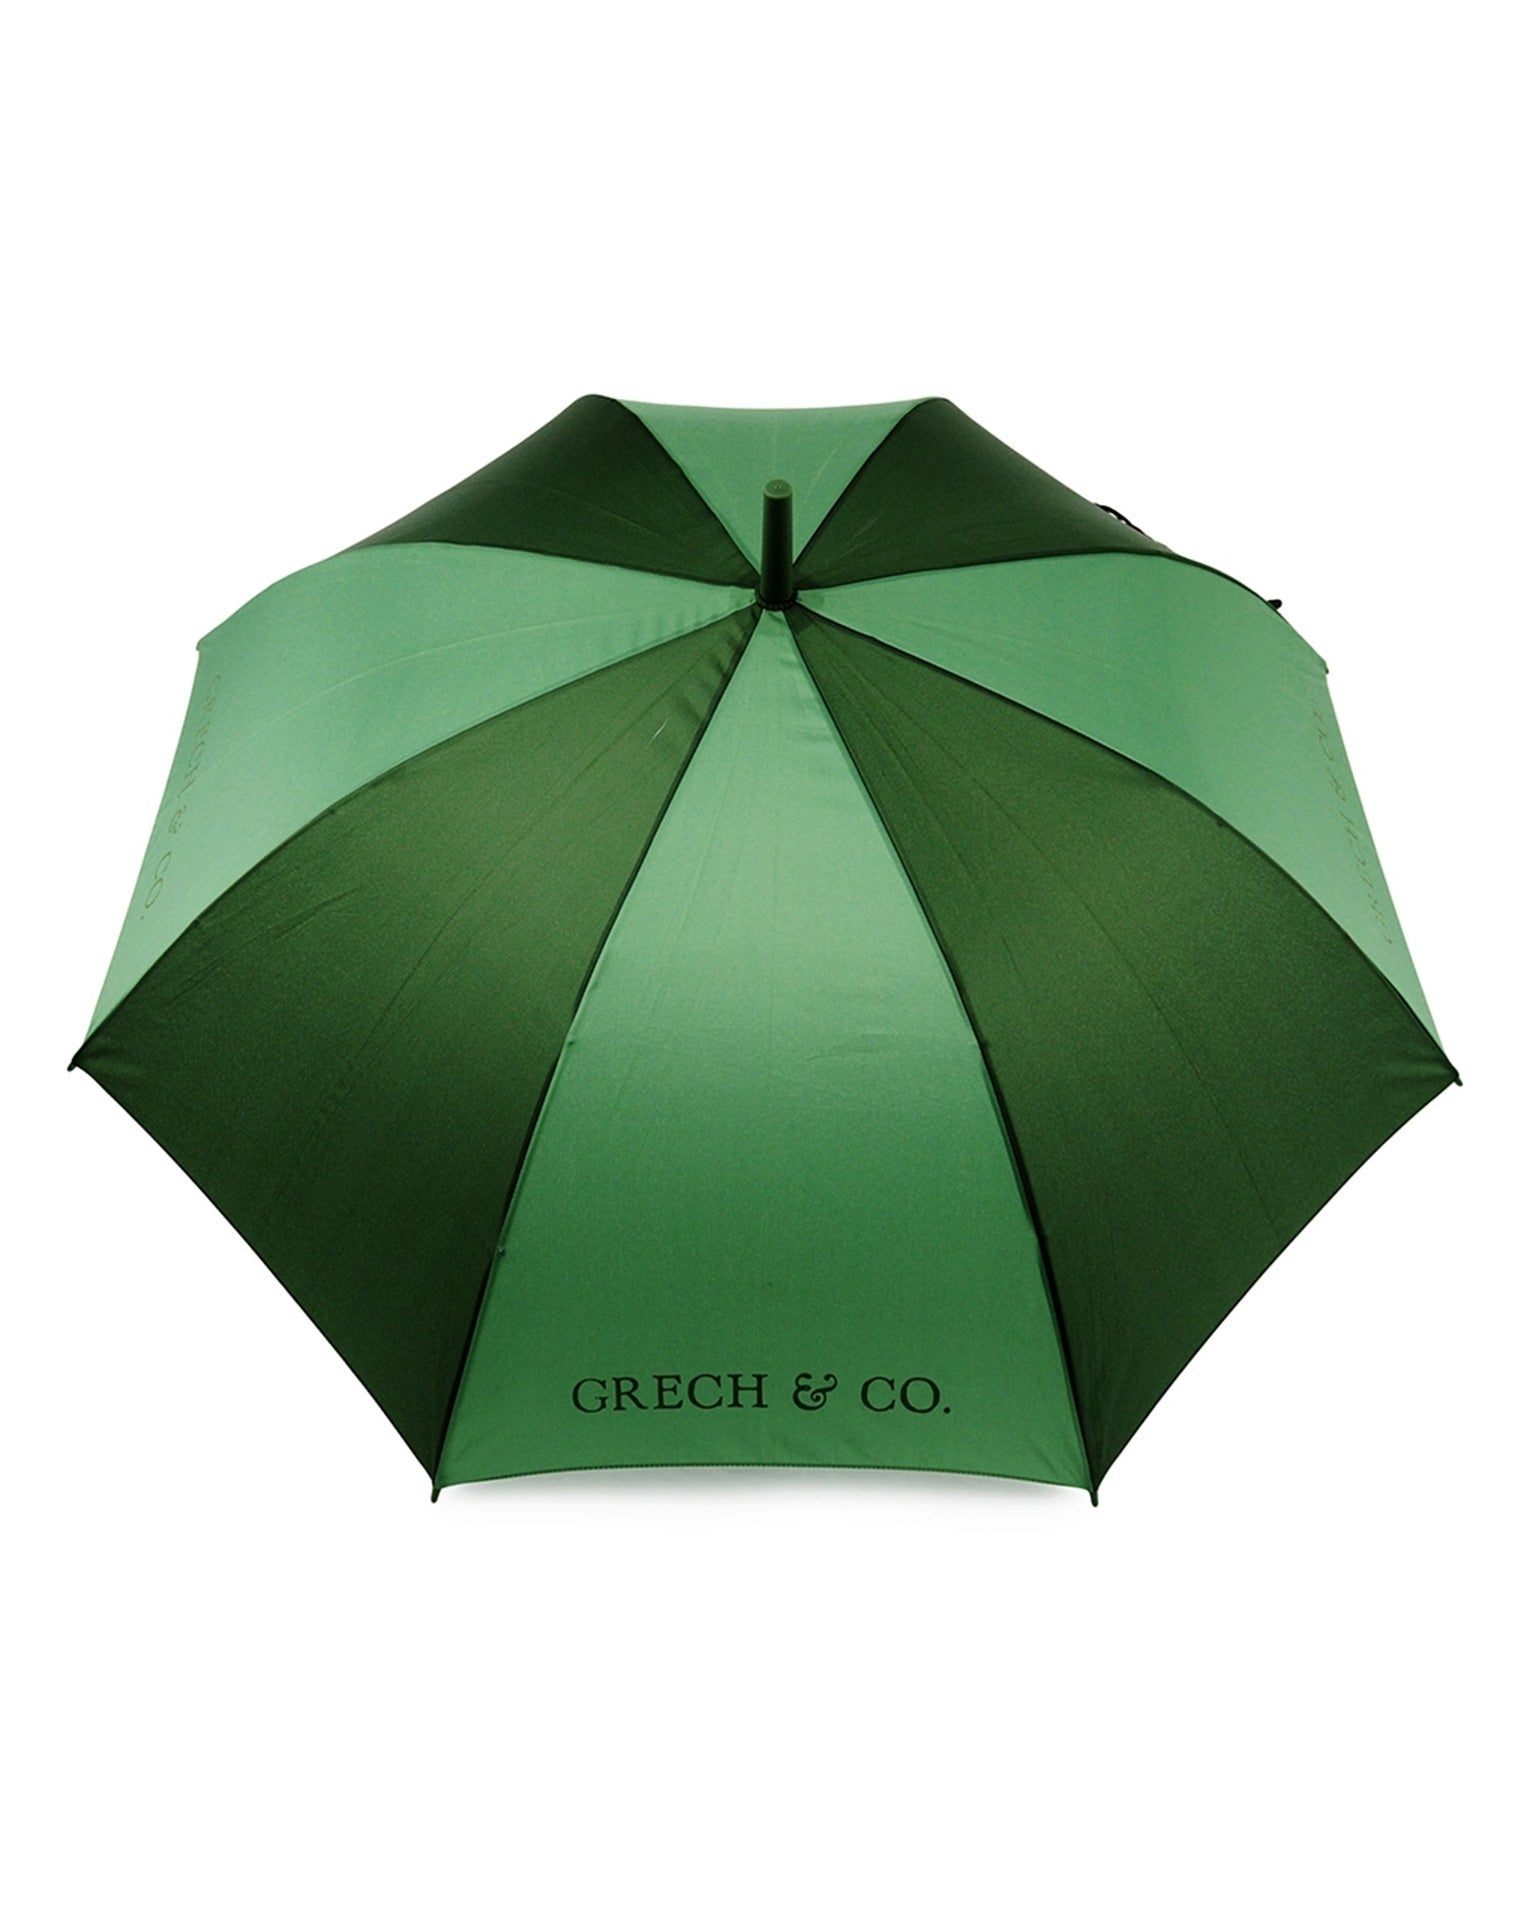 Little grech + co accessories adult umbrella in orchard